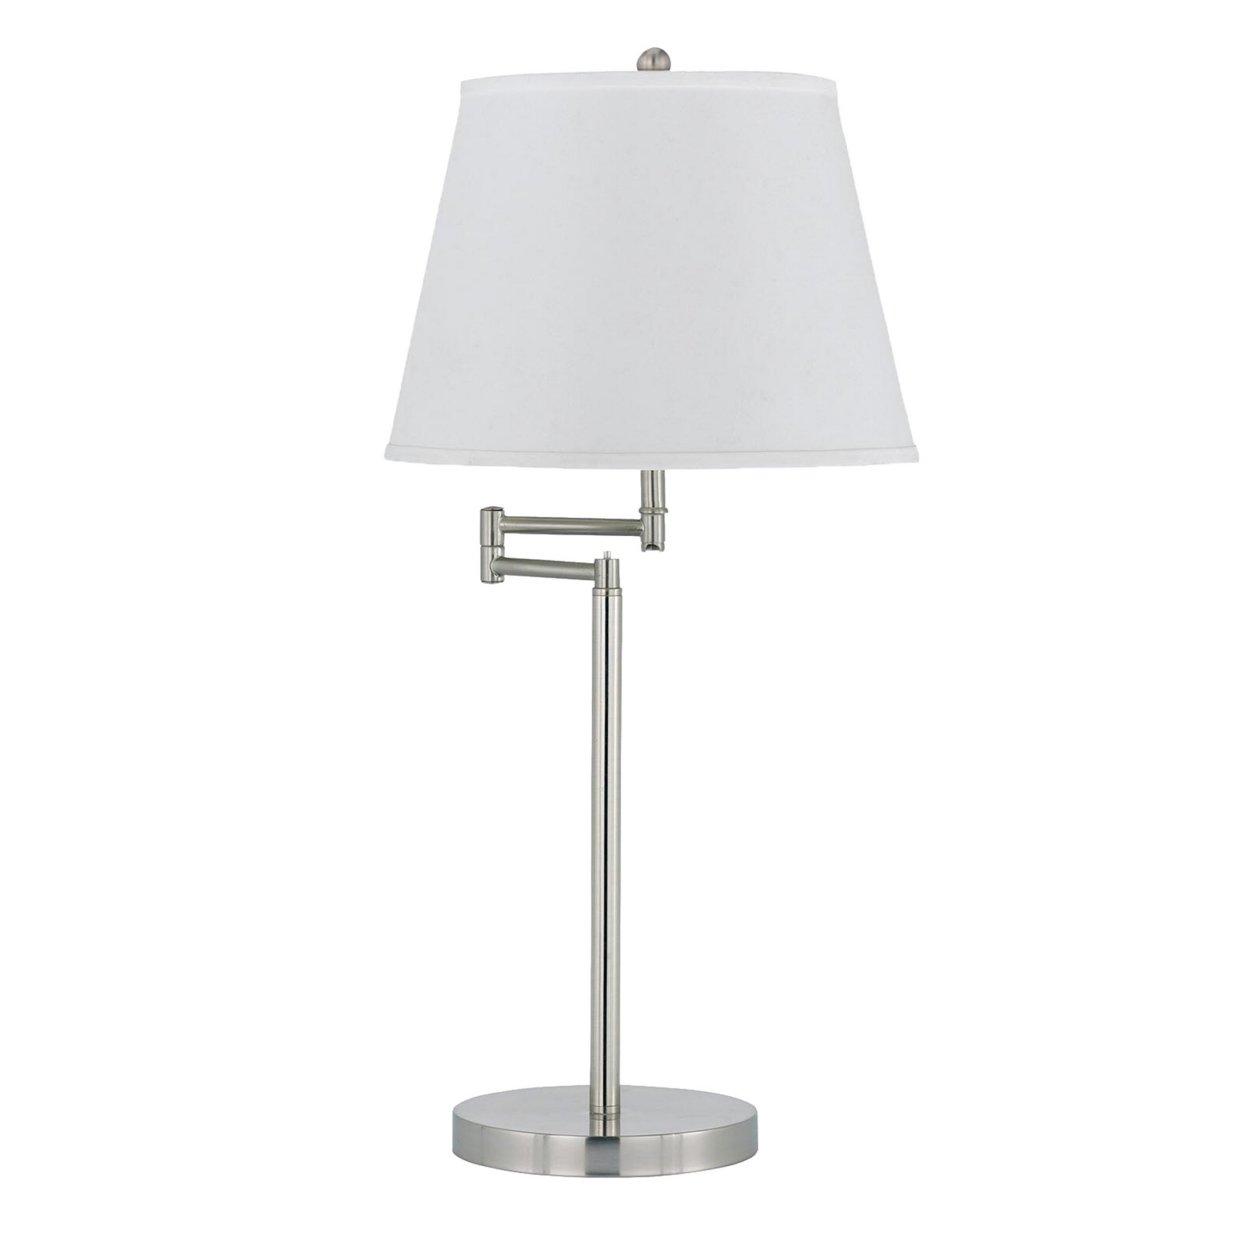 Metal Round 3 Way 28 Table Lamp With Spider Type Shade, Silver And White- Saltoro Sherpi